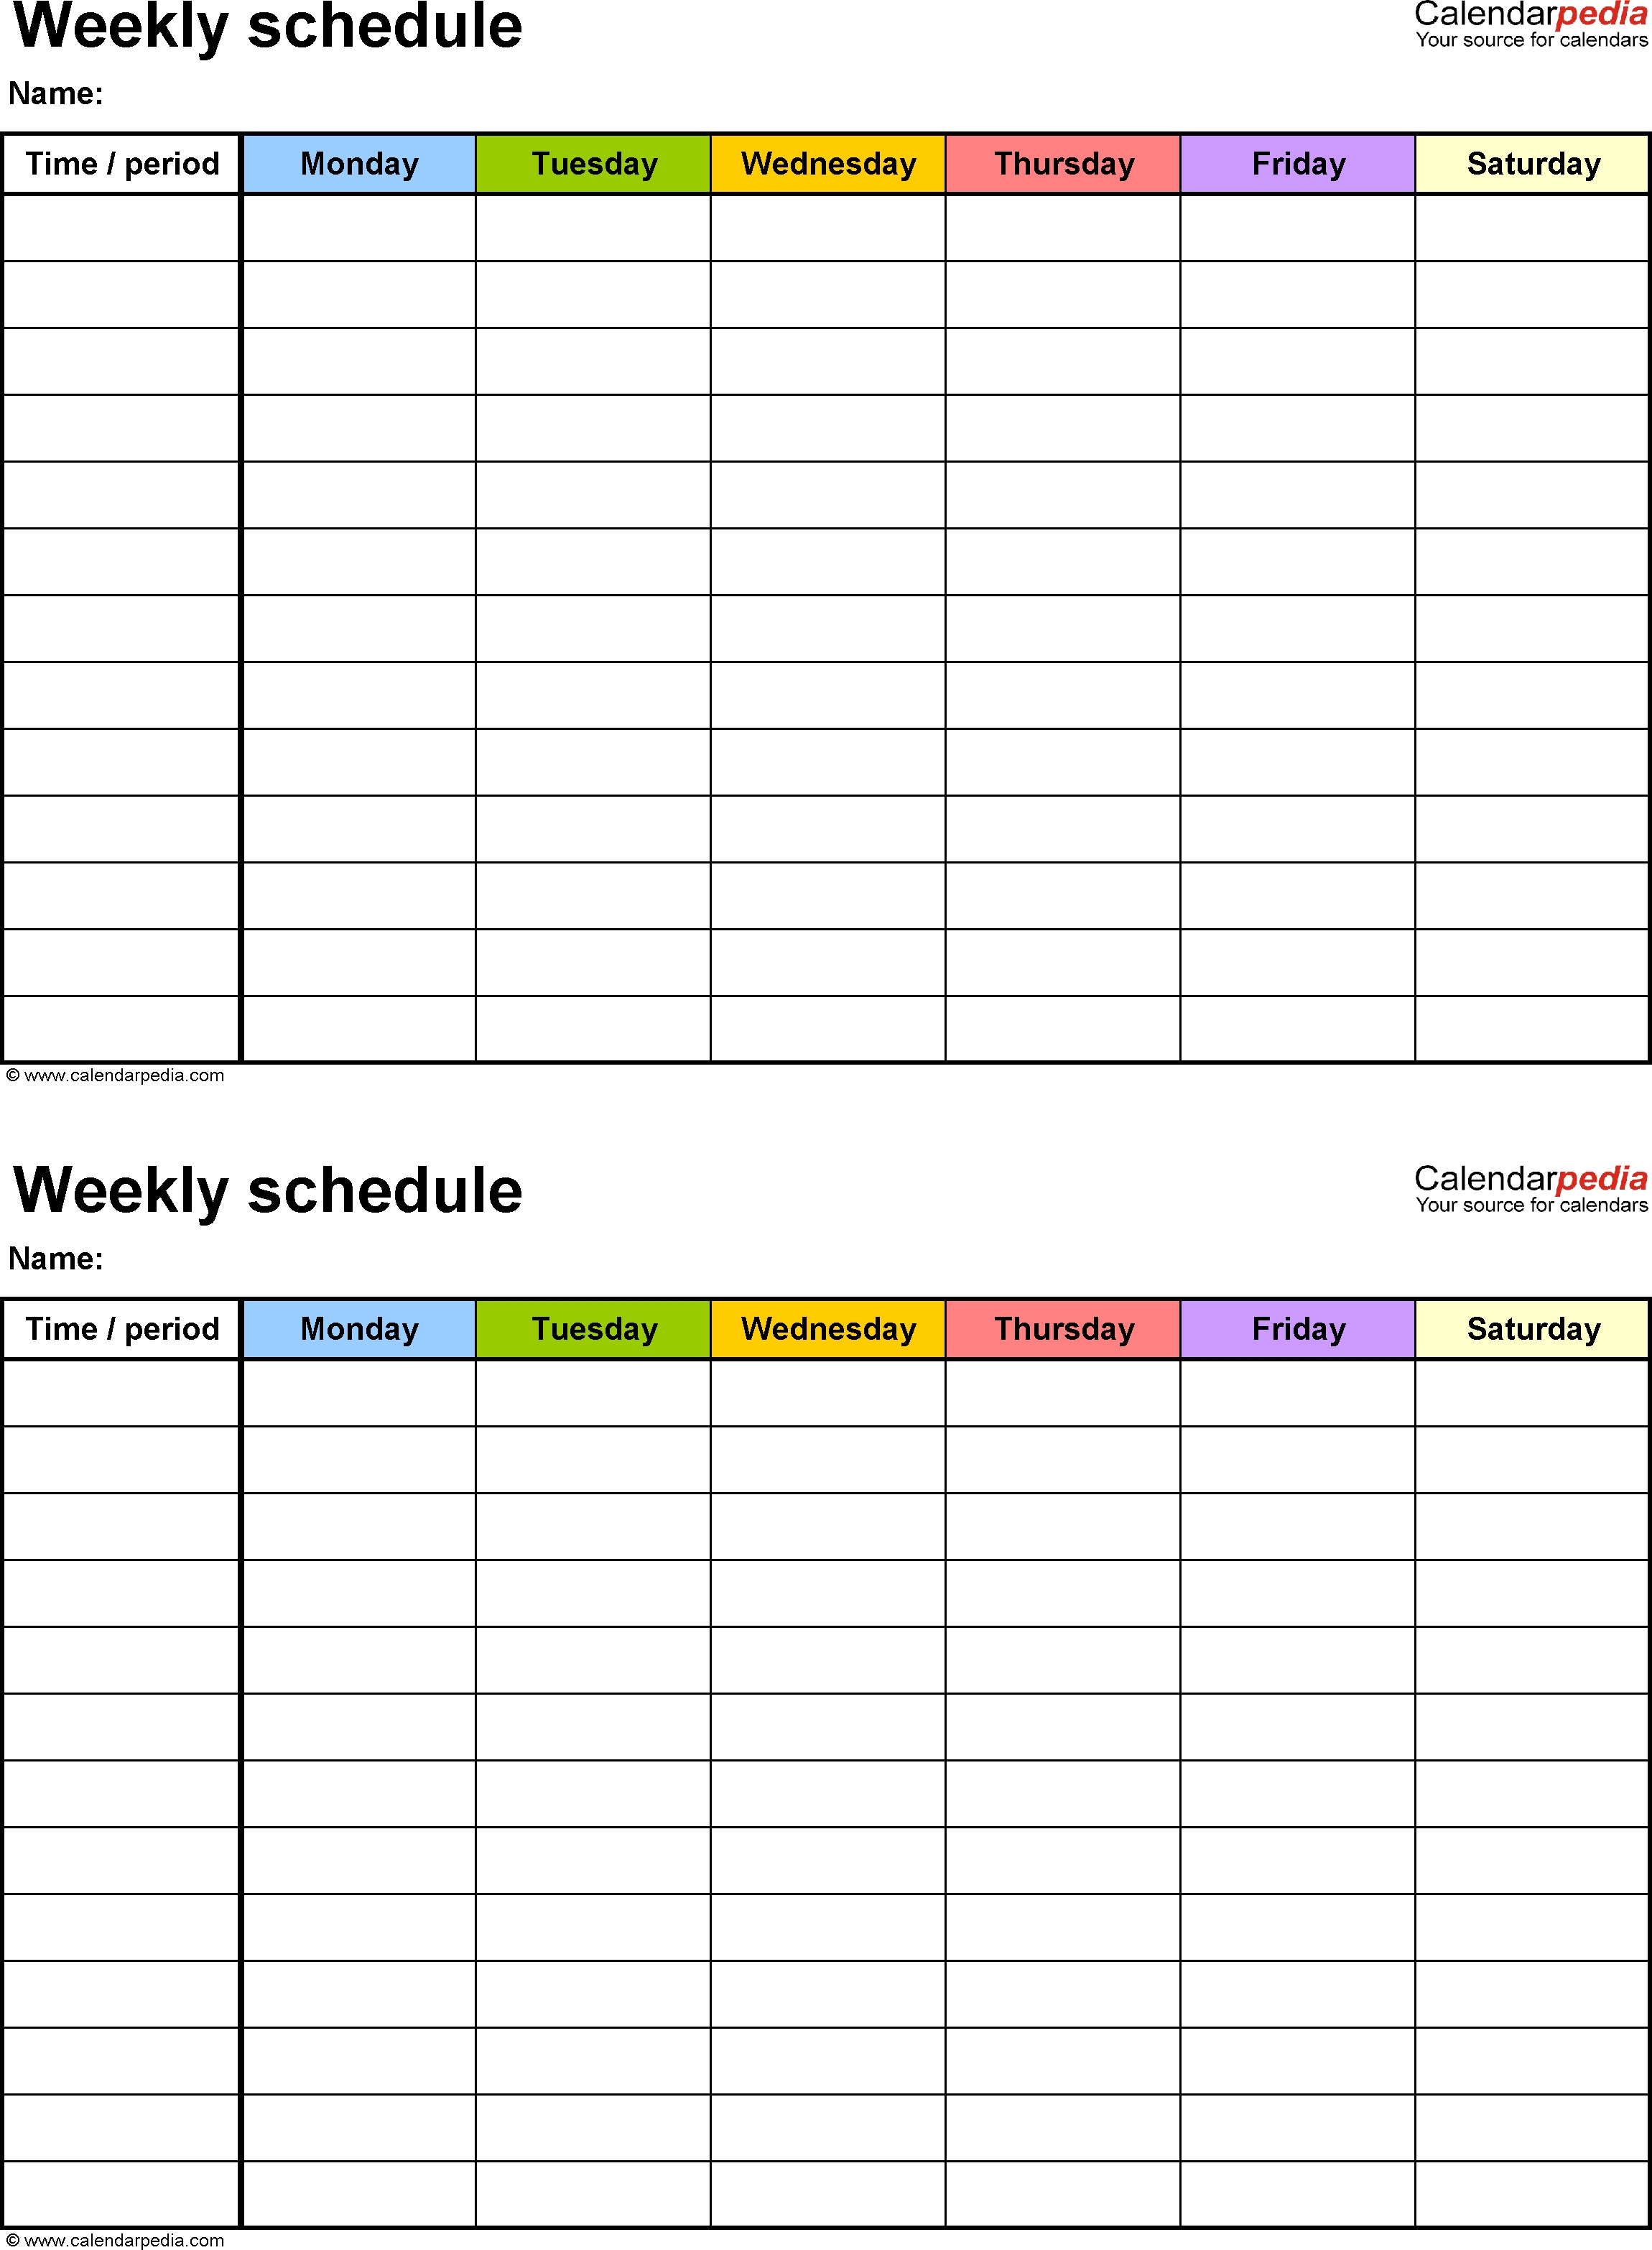 Free Weekly Schedule Templates For Excel - 18 Templates regarding 6 Weeks Holiday Timeline Template